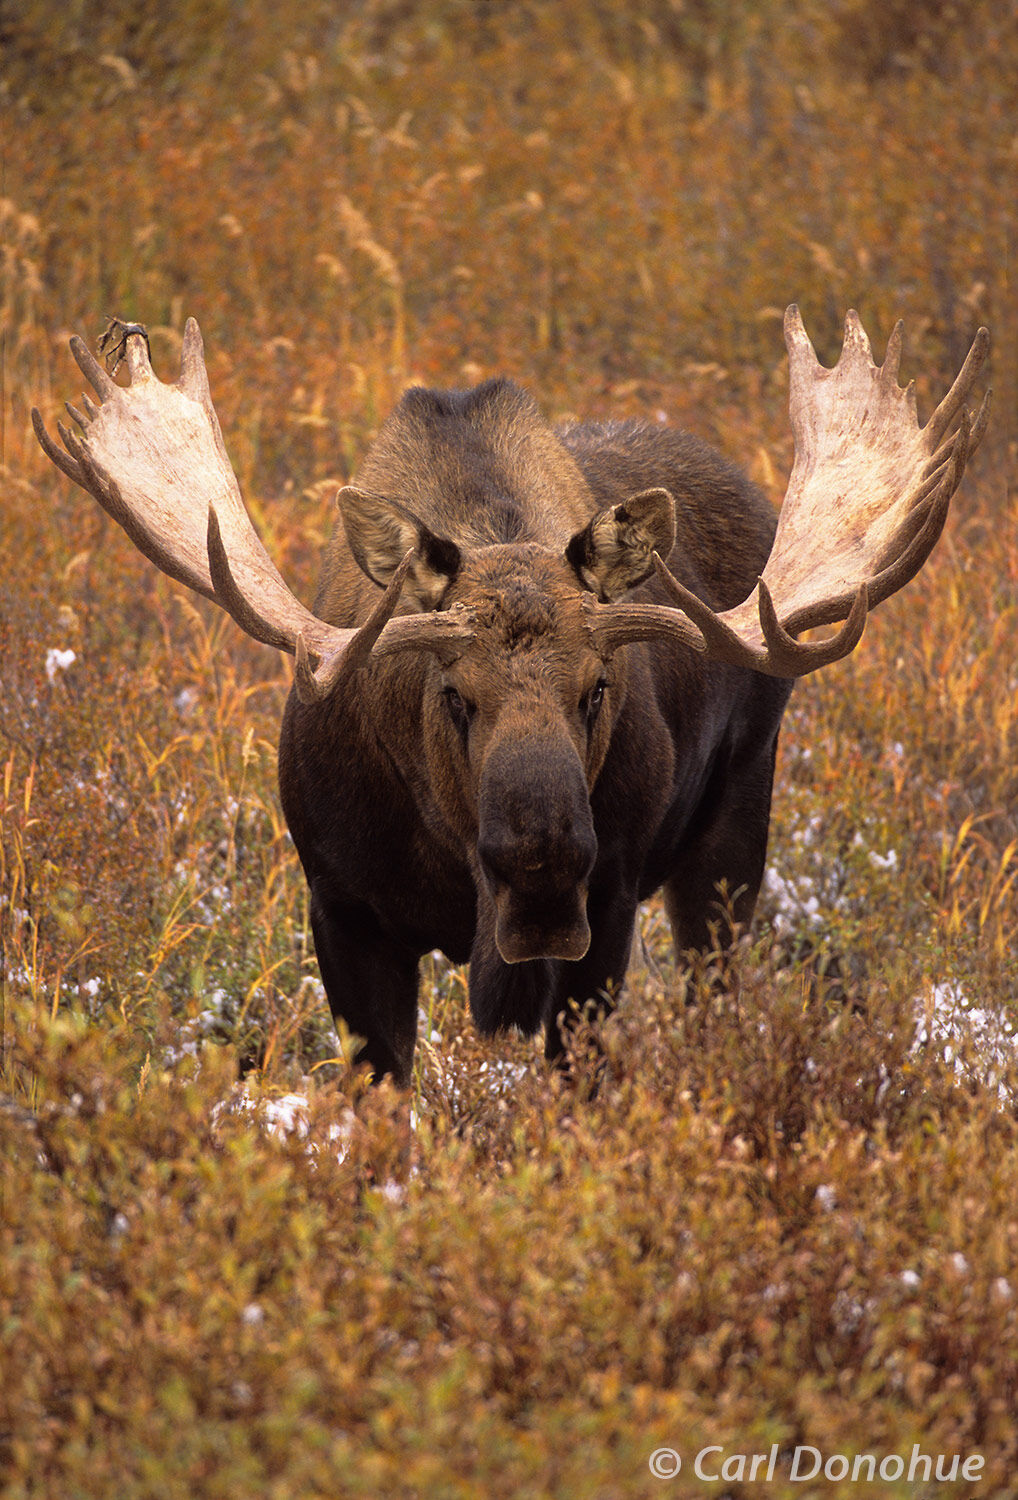 The fall colors provide a stunning backdrop for this photo of a bull moose in Denali National Park. The bull moose stands strong...